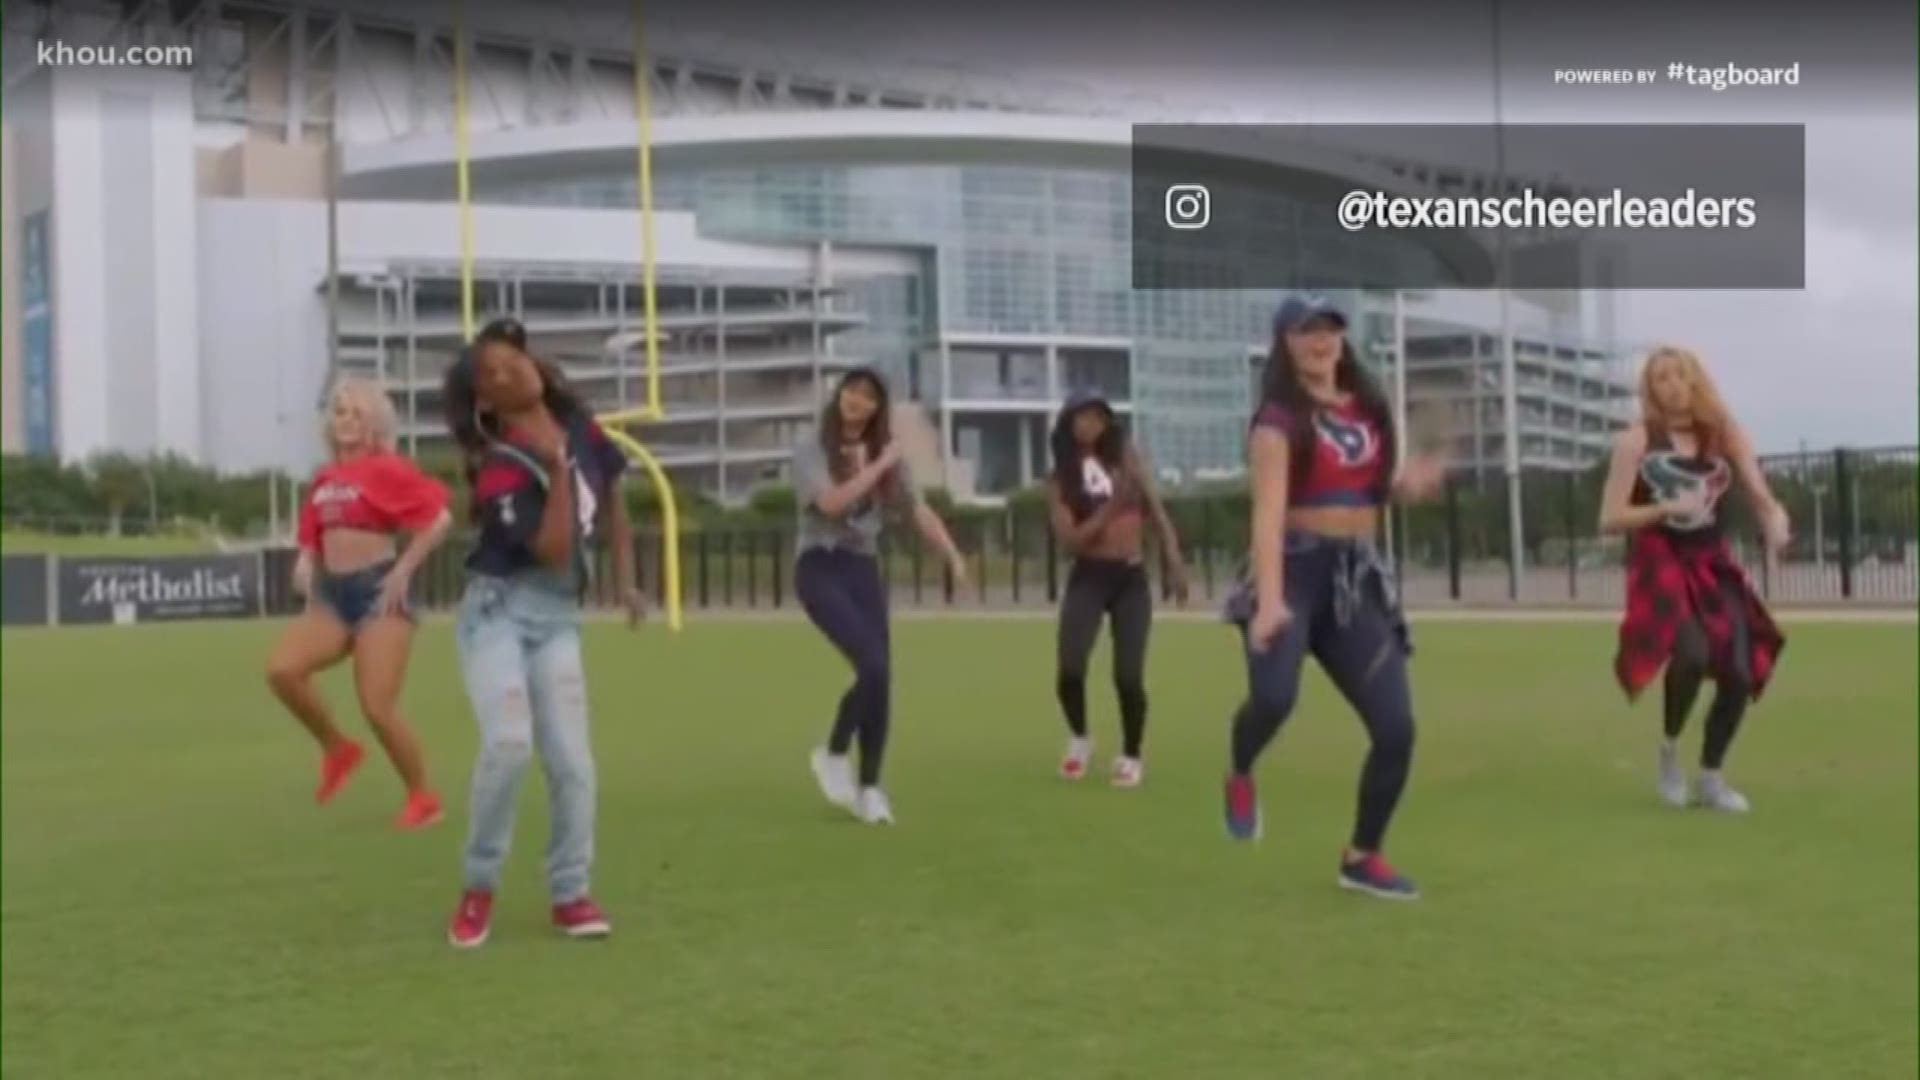 The Houston Texans Cheerleaders give us their take on the "Before I Let Go" challenge from Beyonce.